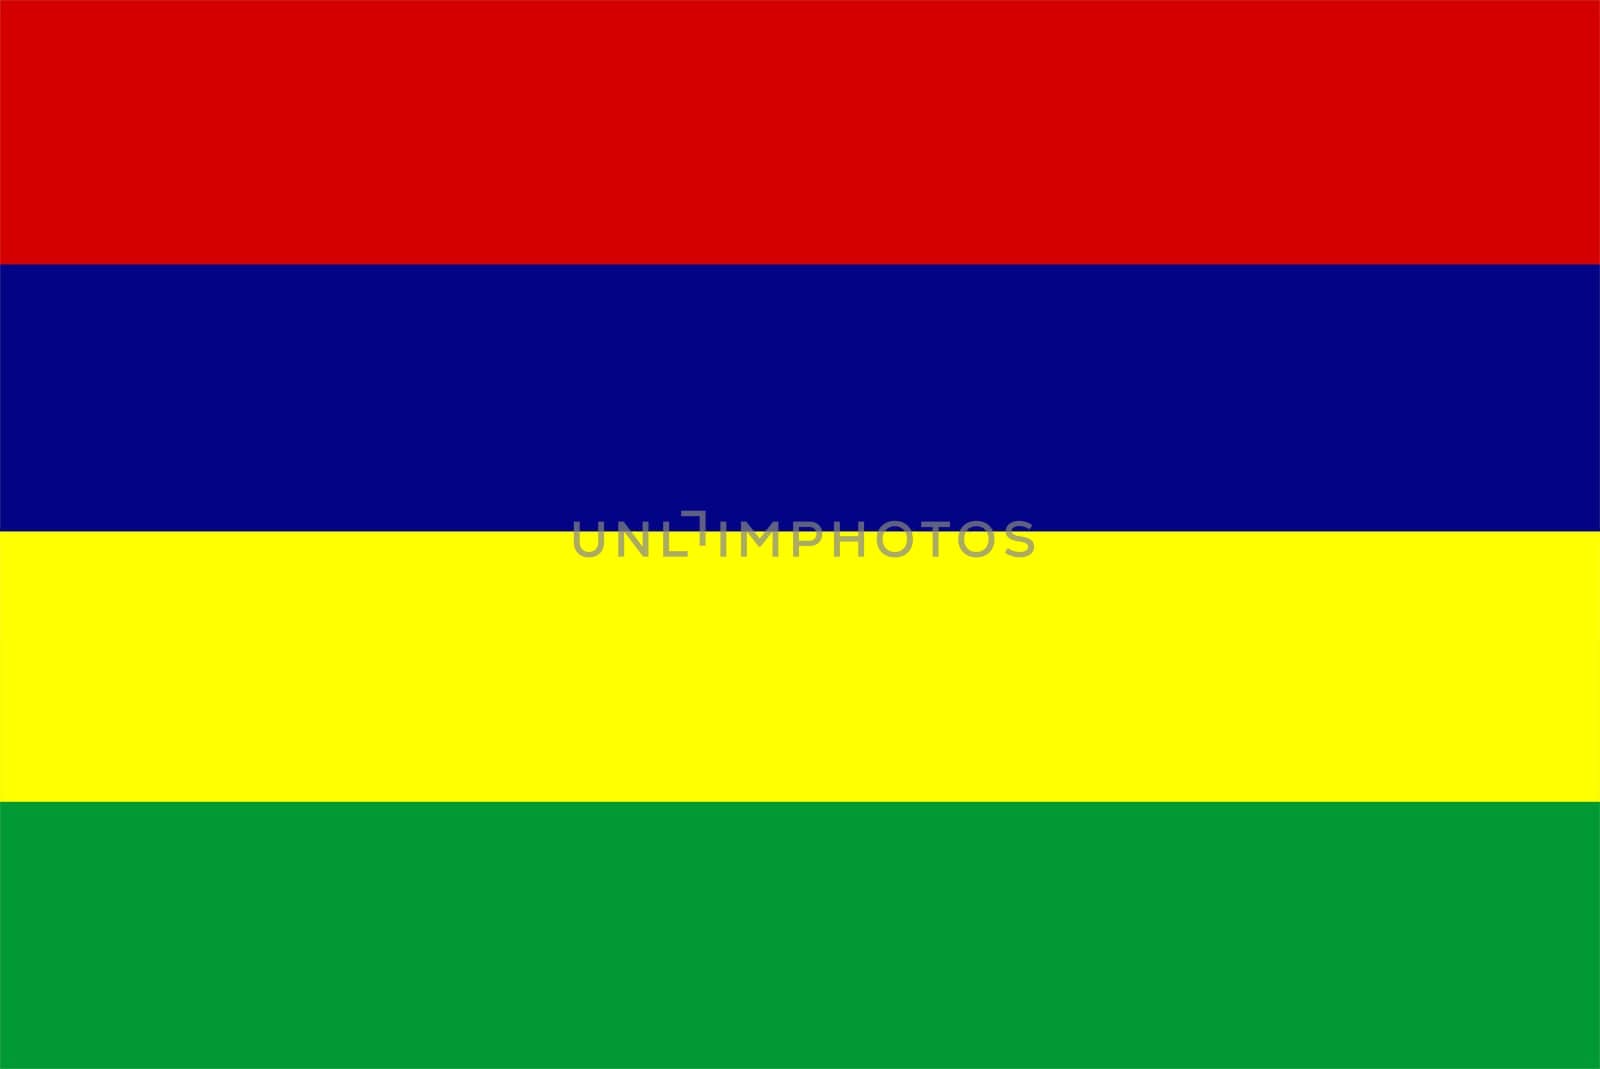 2D illustration of the flag of Mauritius vector